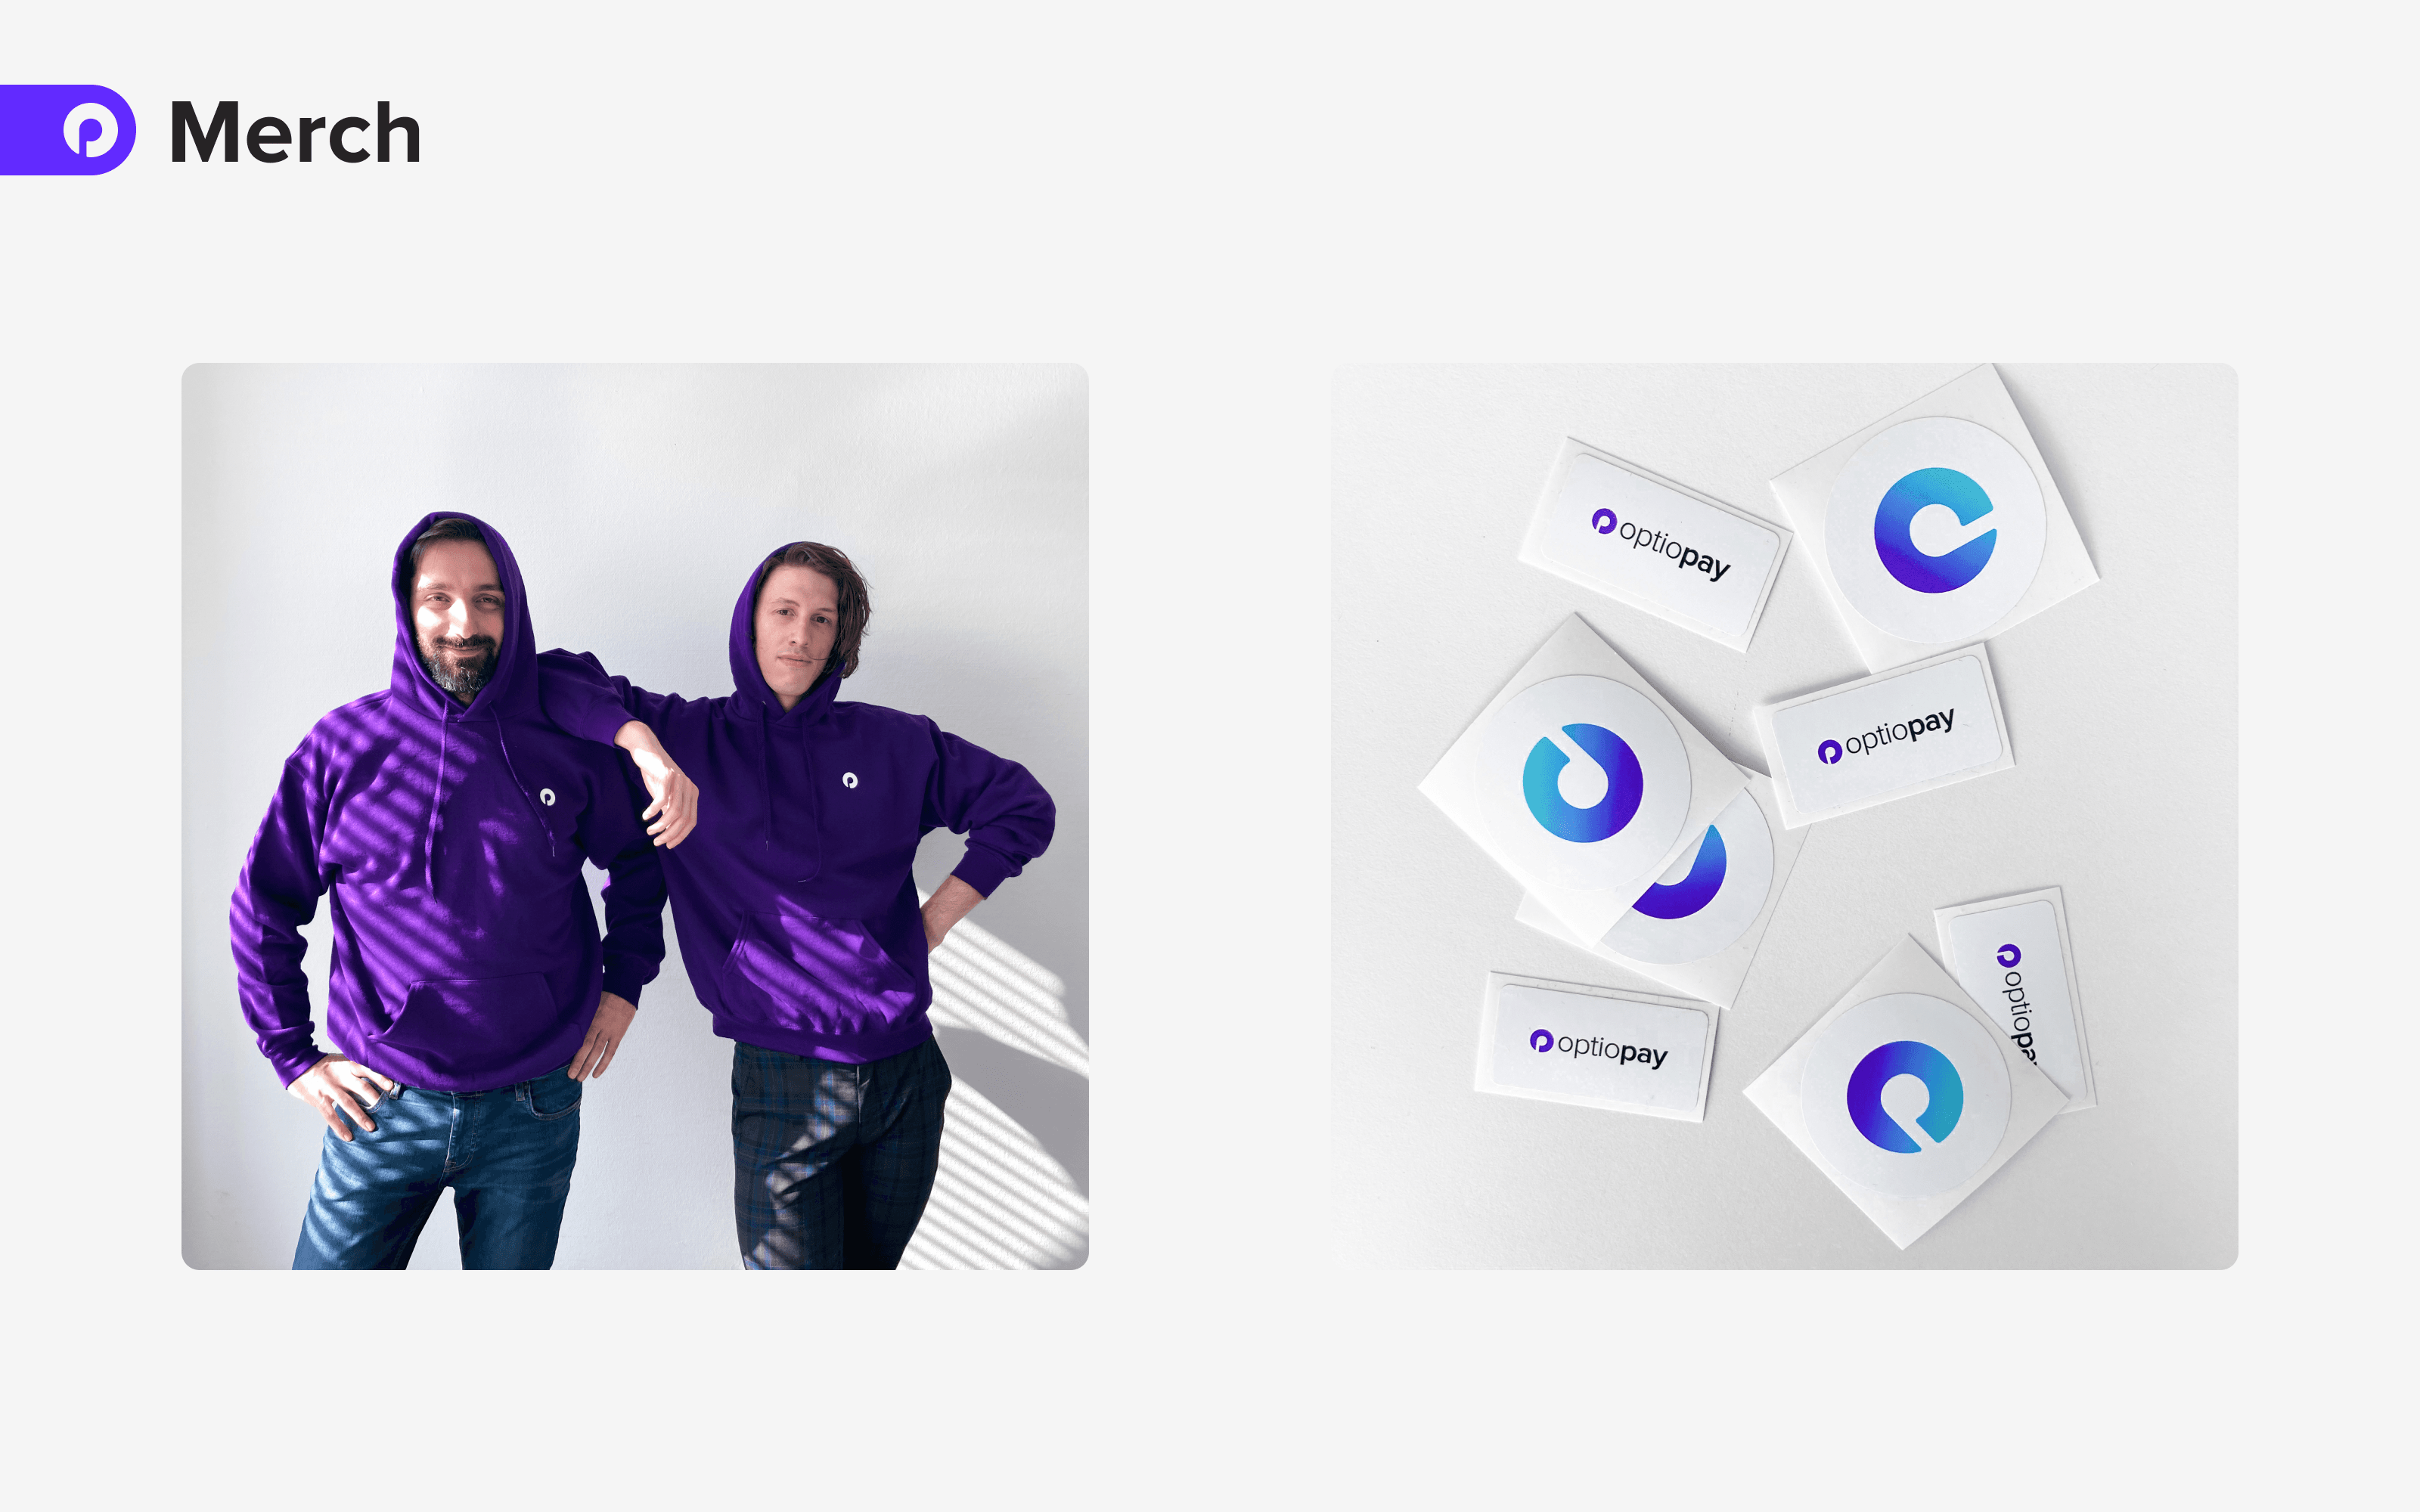 Merchandize examples. On the left side of the slide: a photo two men wearing purple hoodies with a small circular logo in the left side of the chest. On the right side of the slide: a photo of colorful purple and cyan stickers with optiopay logo.